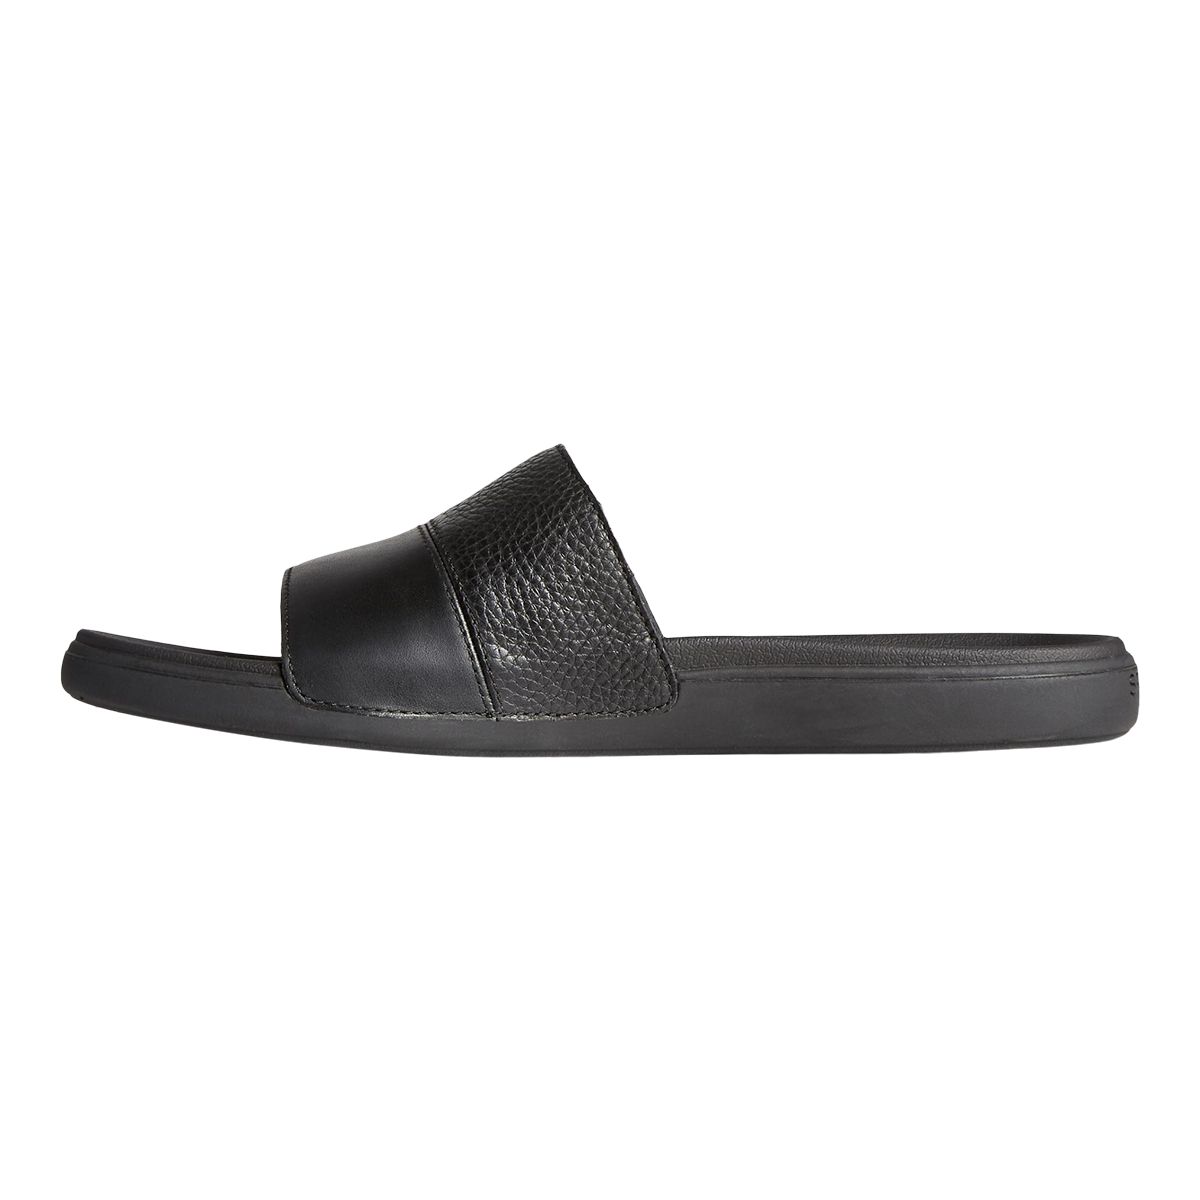 Doc And Mark Sandals - Buy Doc And Mark Sandals online in India